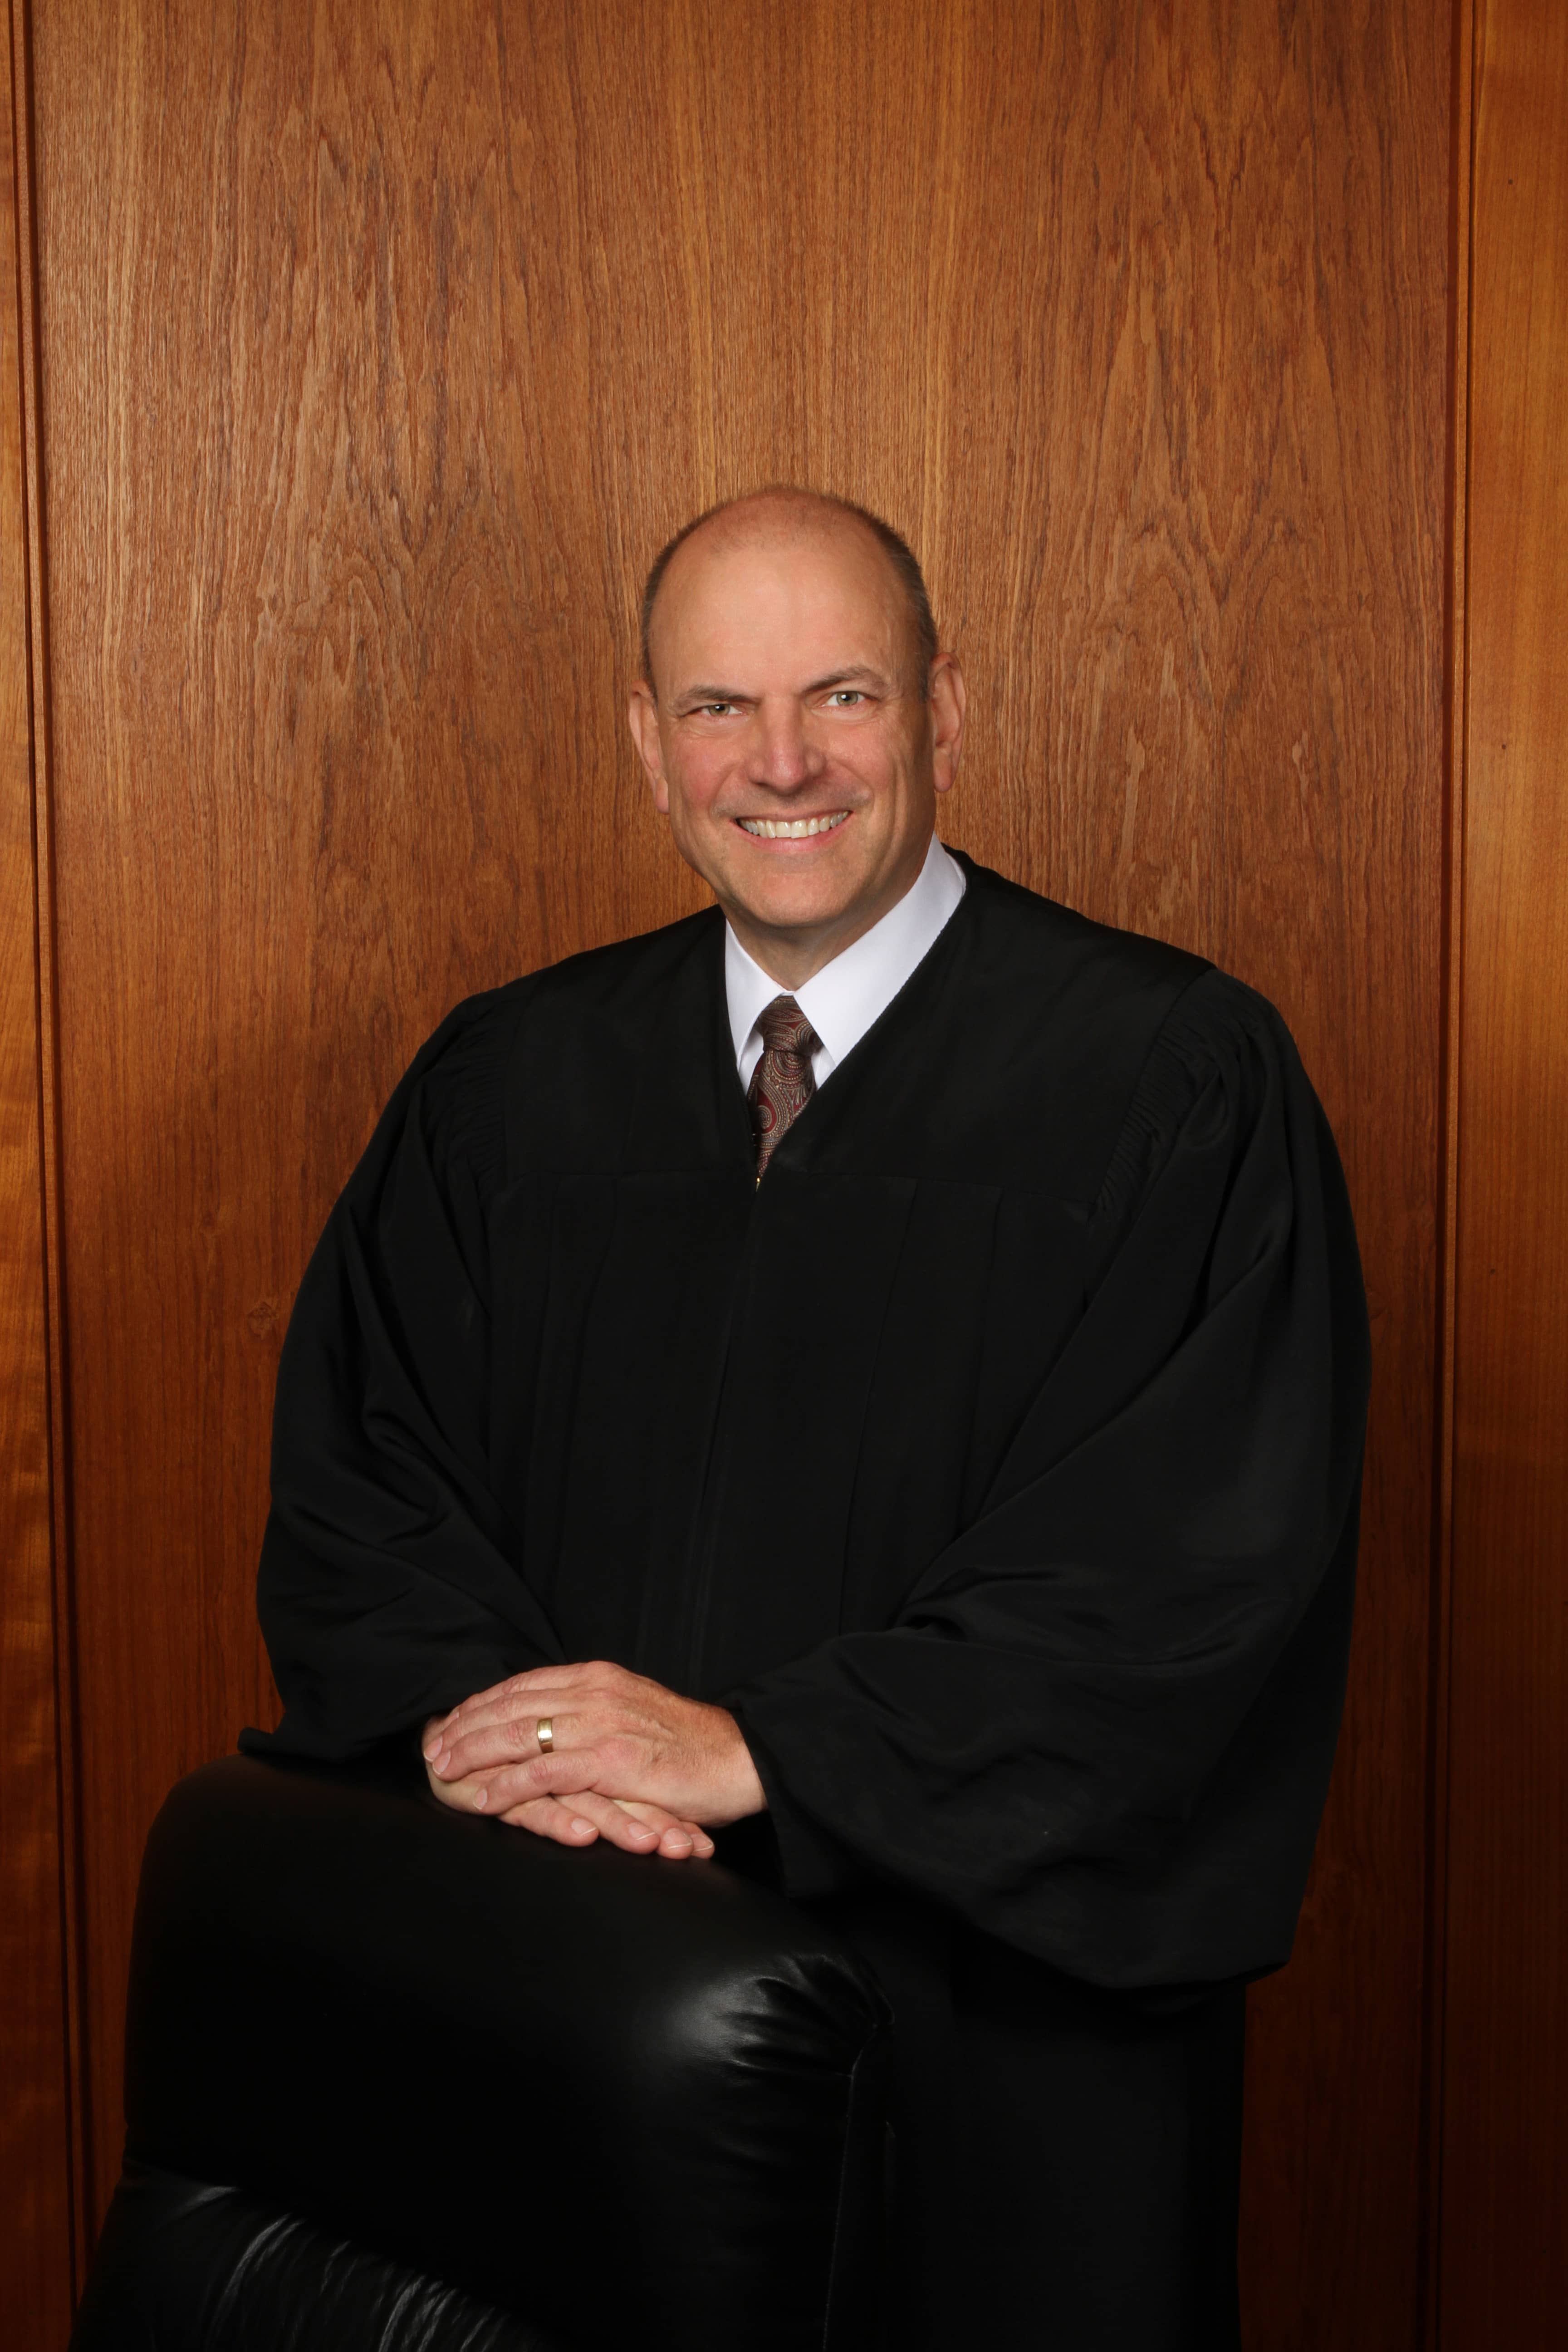 Image of G. Richard Bevan, State Supreme Court Justice, Nonpartisan